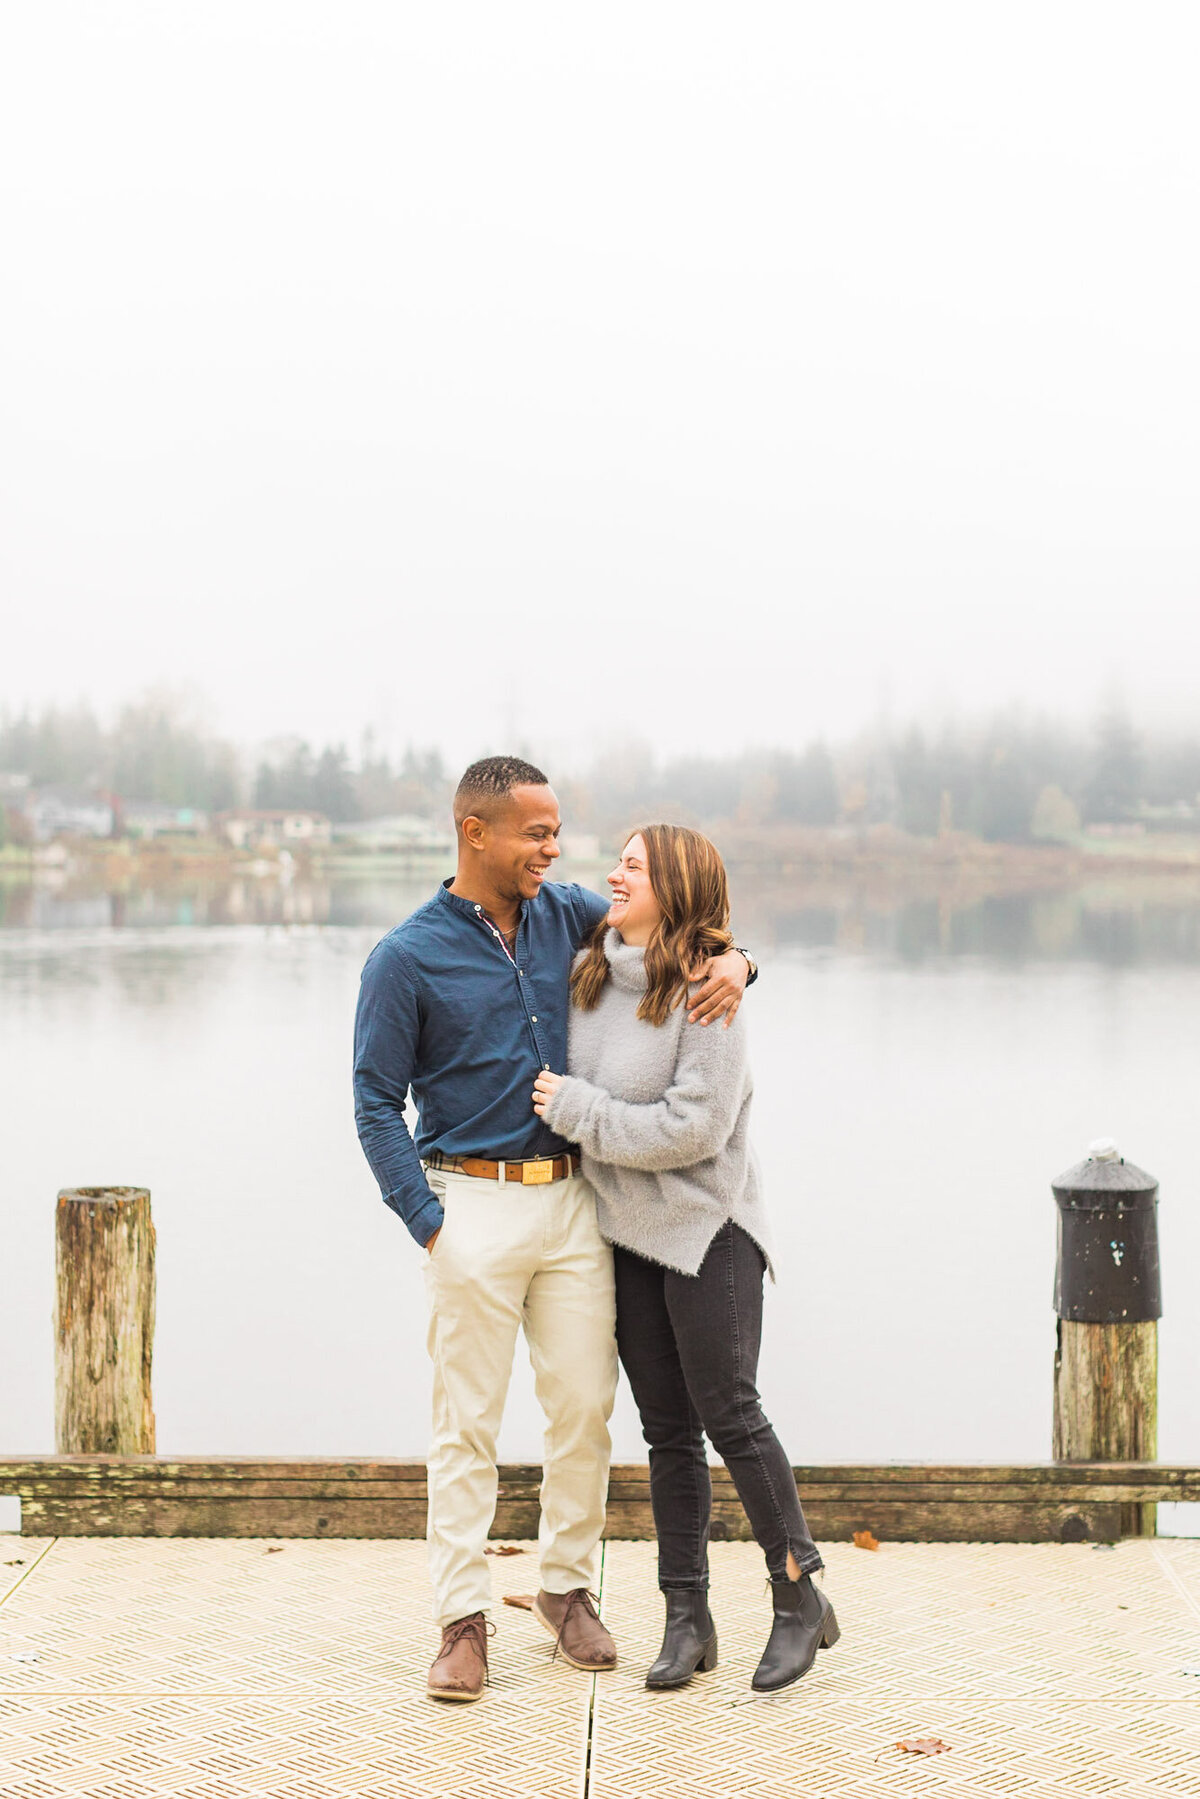 Romantic engagement photos by misty lake in Snohomish WA photo by Joanna Monger Photography